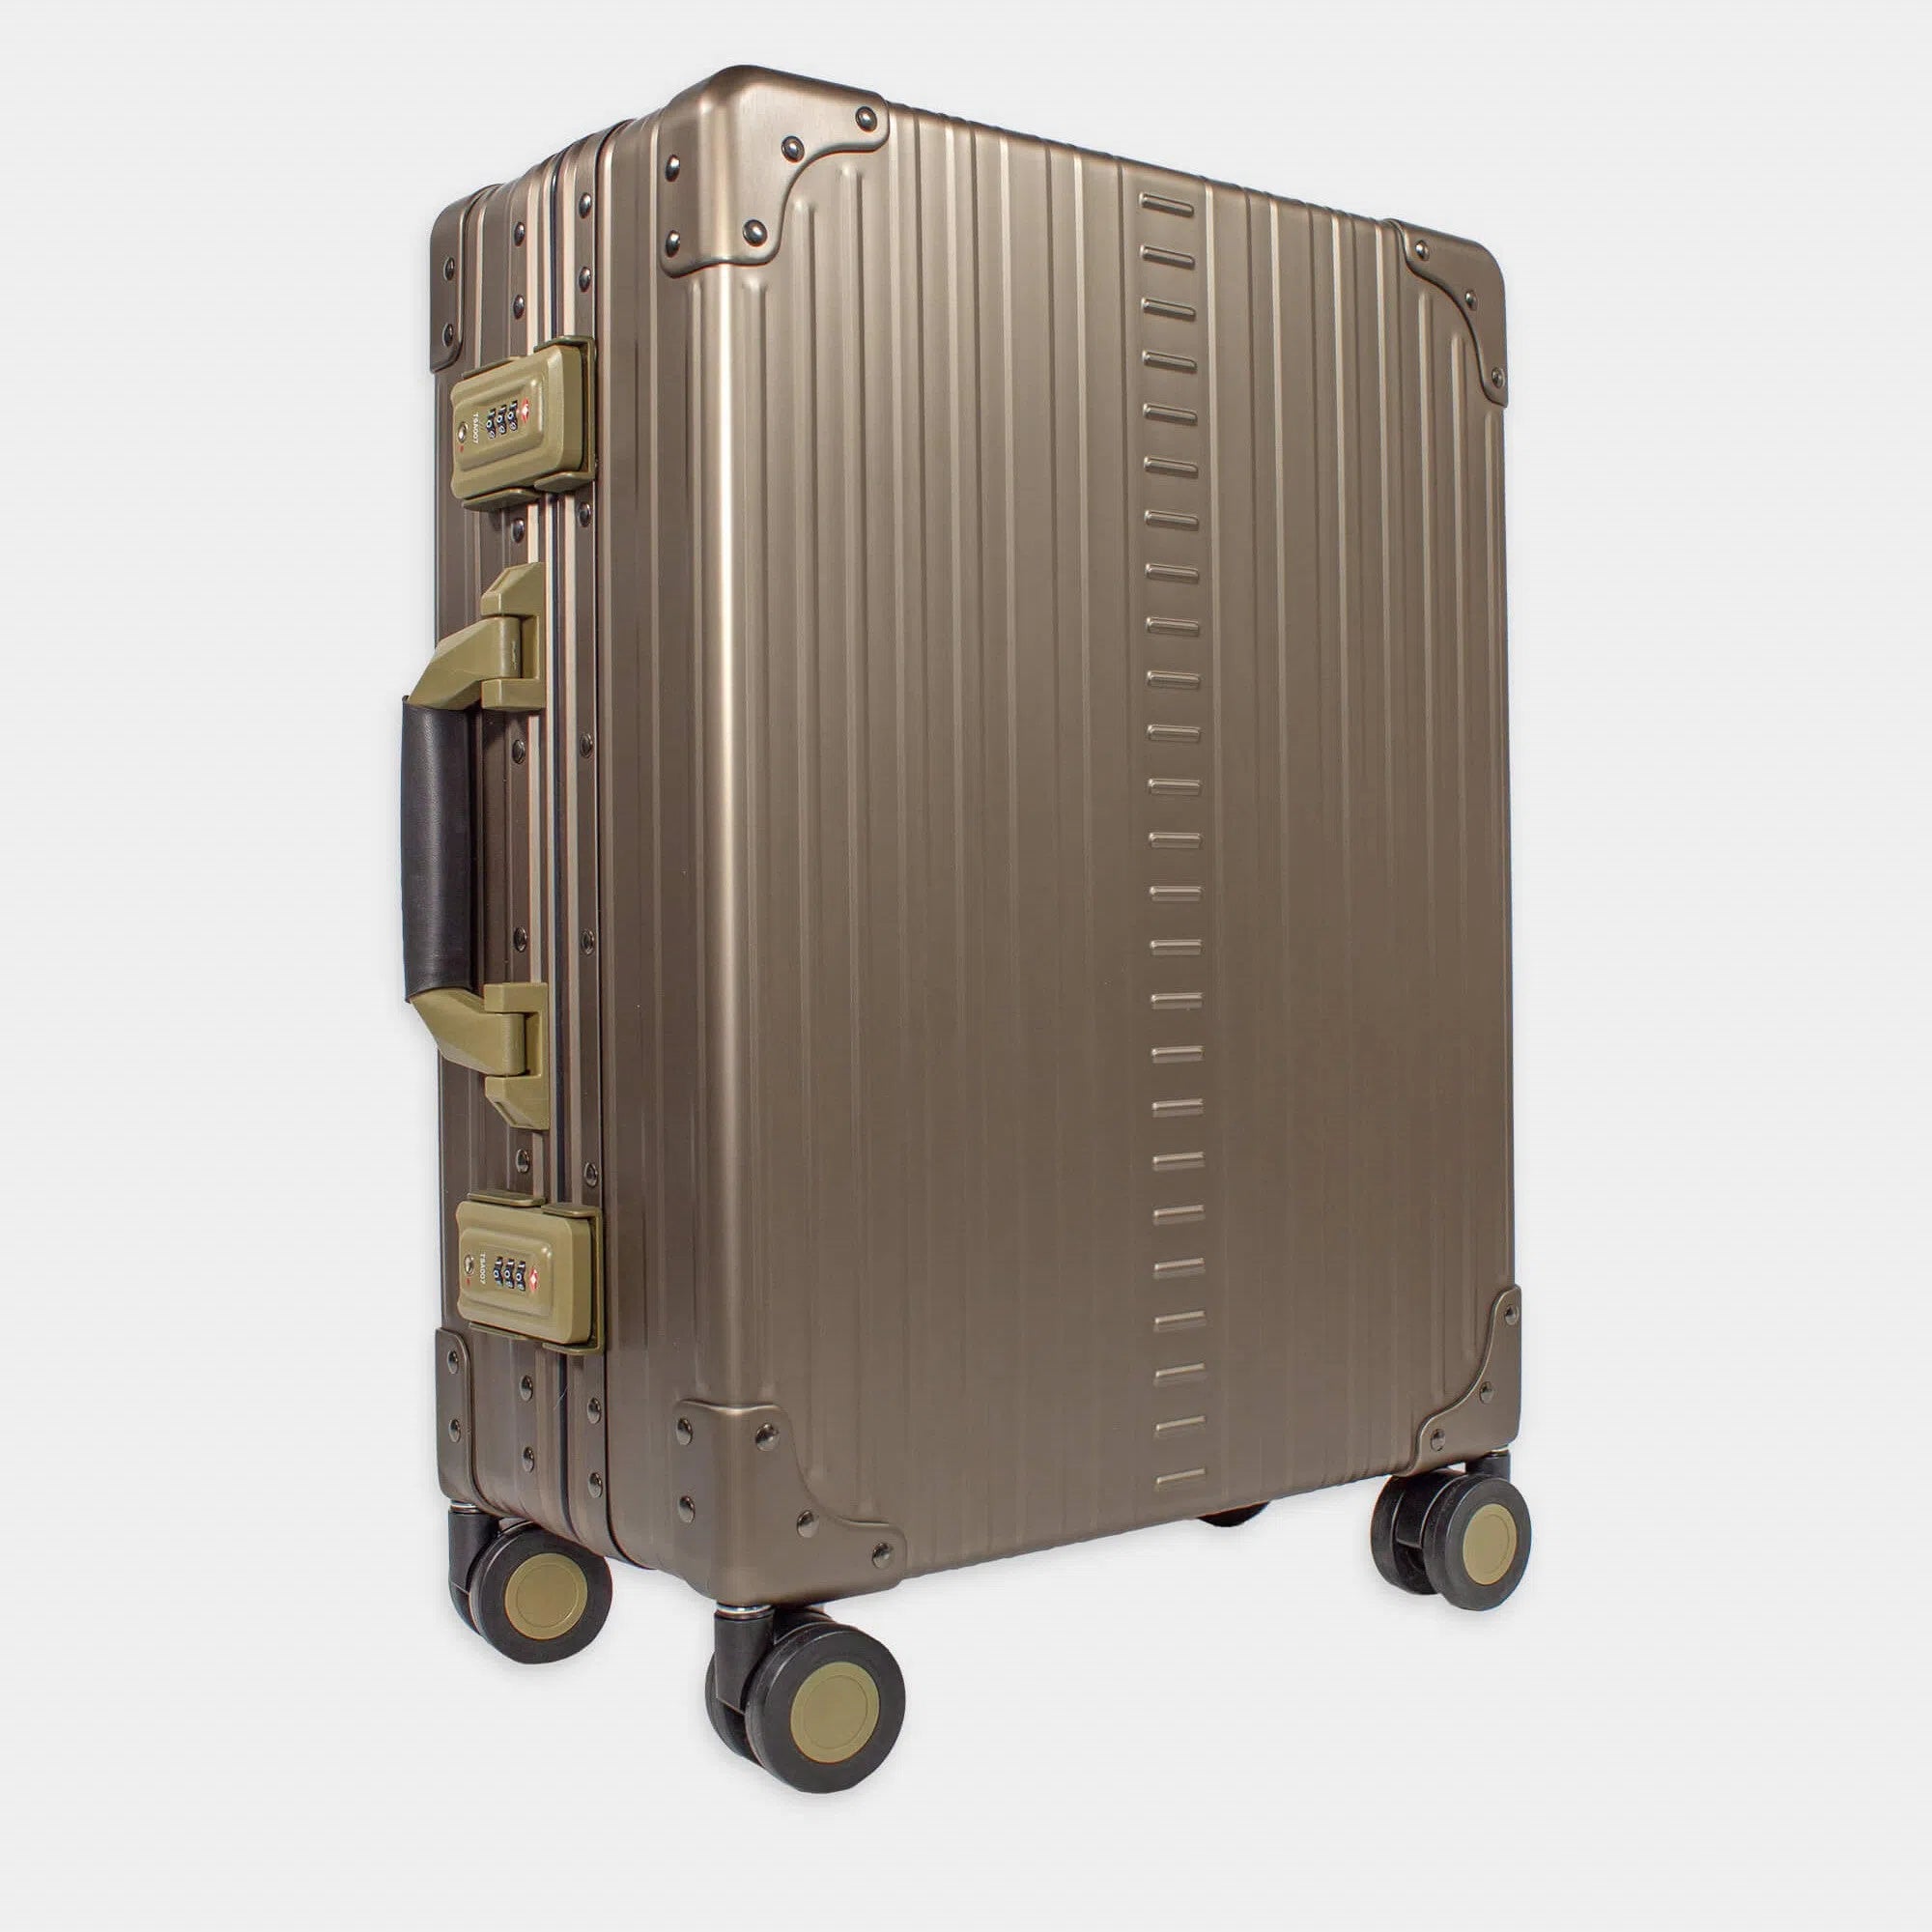 ALEON 21" International Carry-On Trolley bronze hover